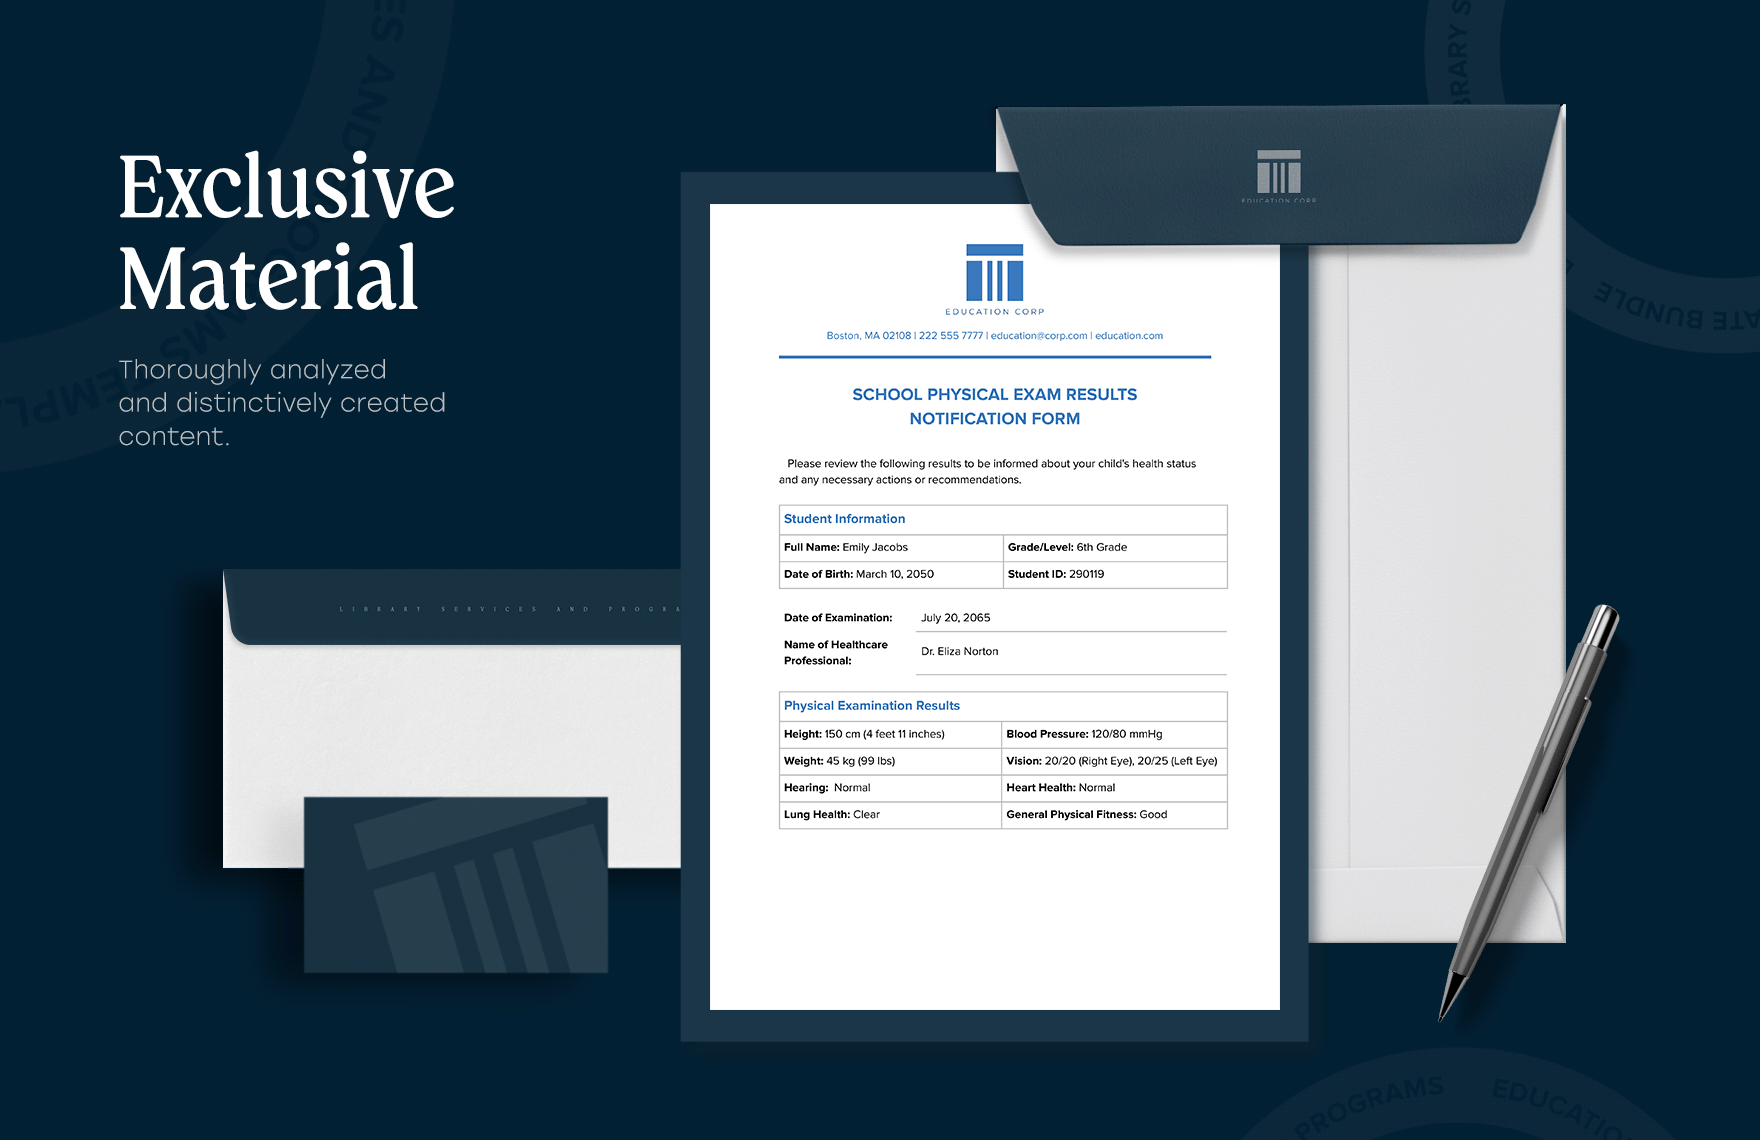 10 Education Library Services and Programs Template Bundle